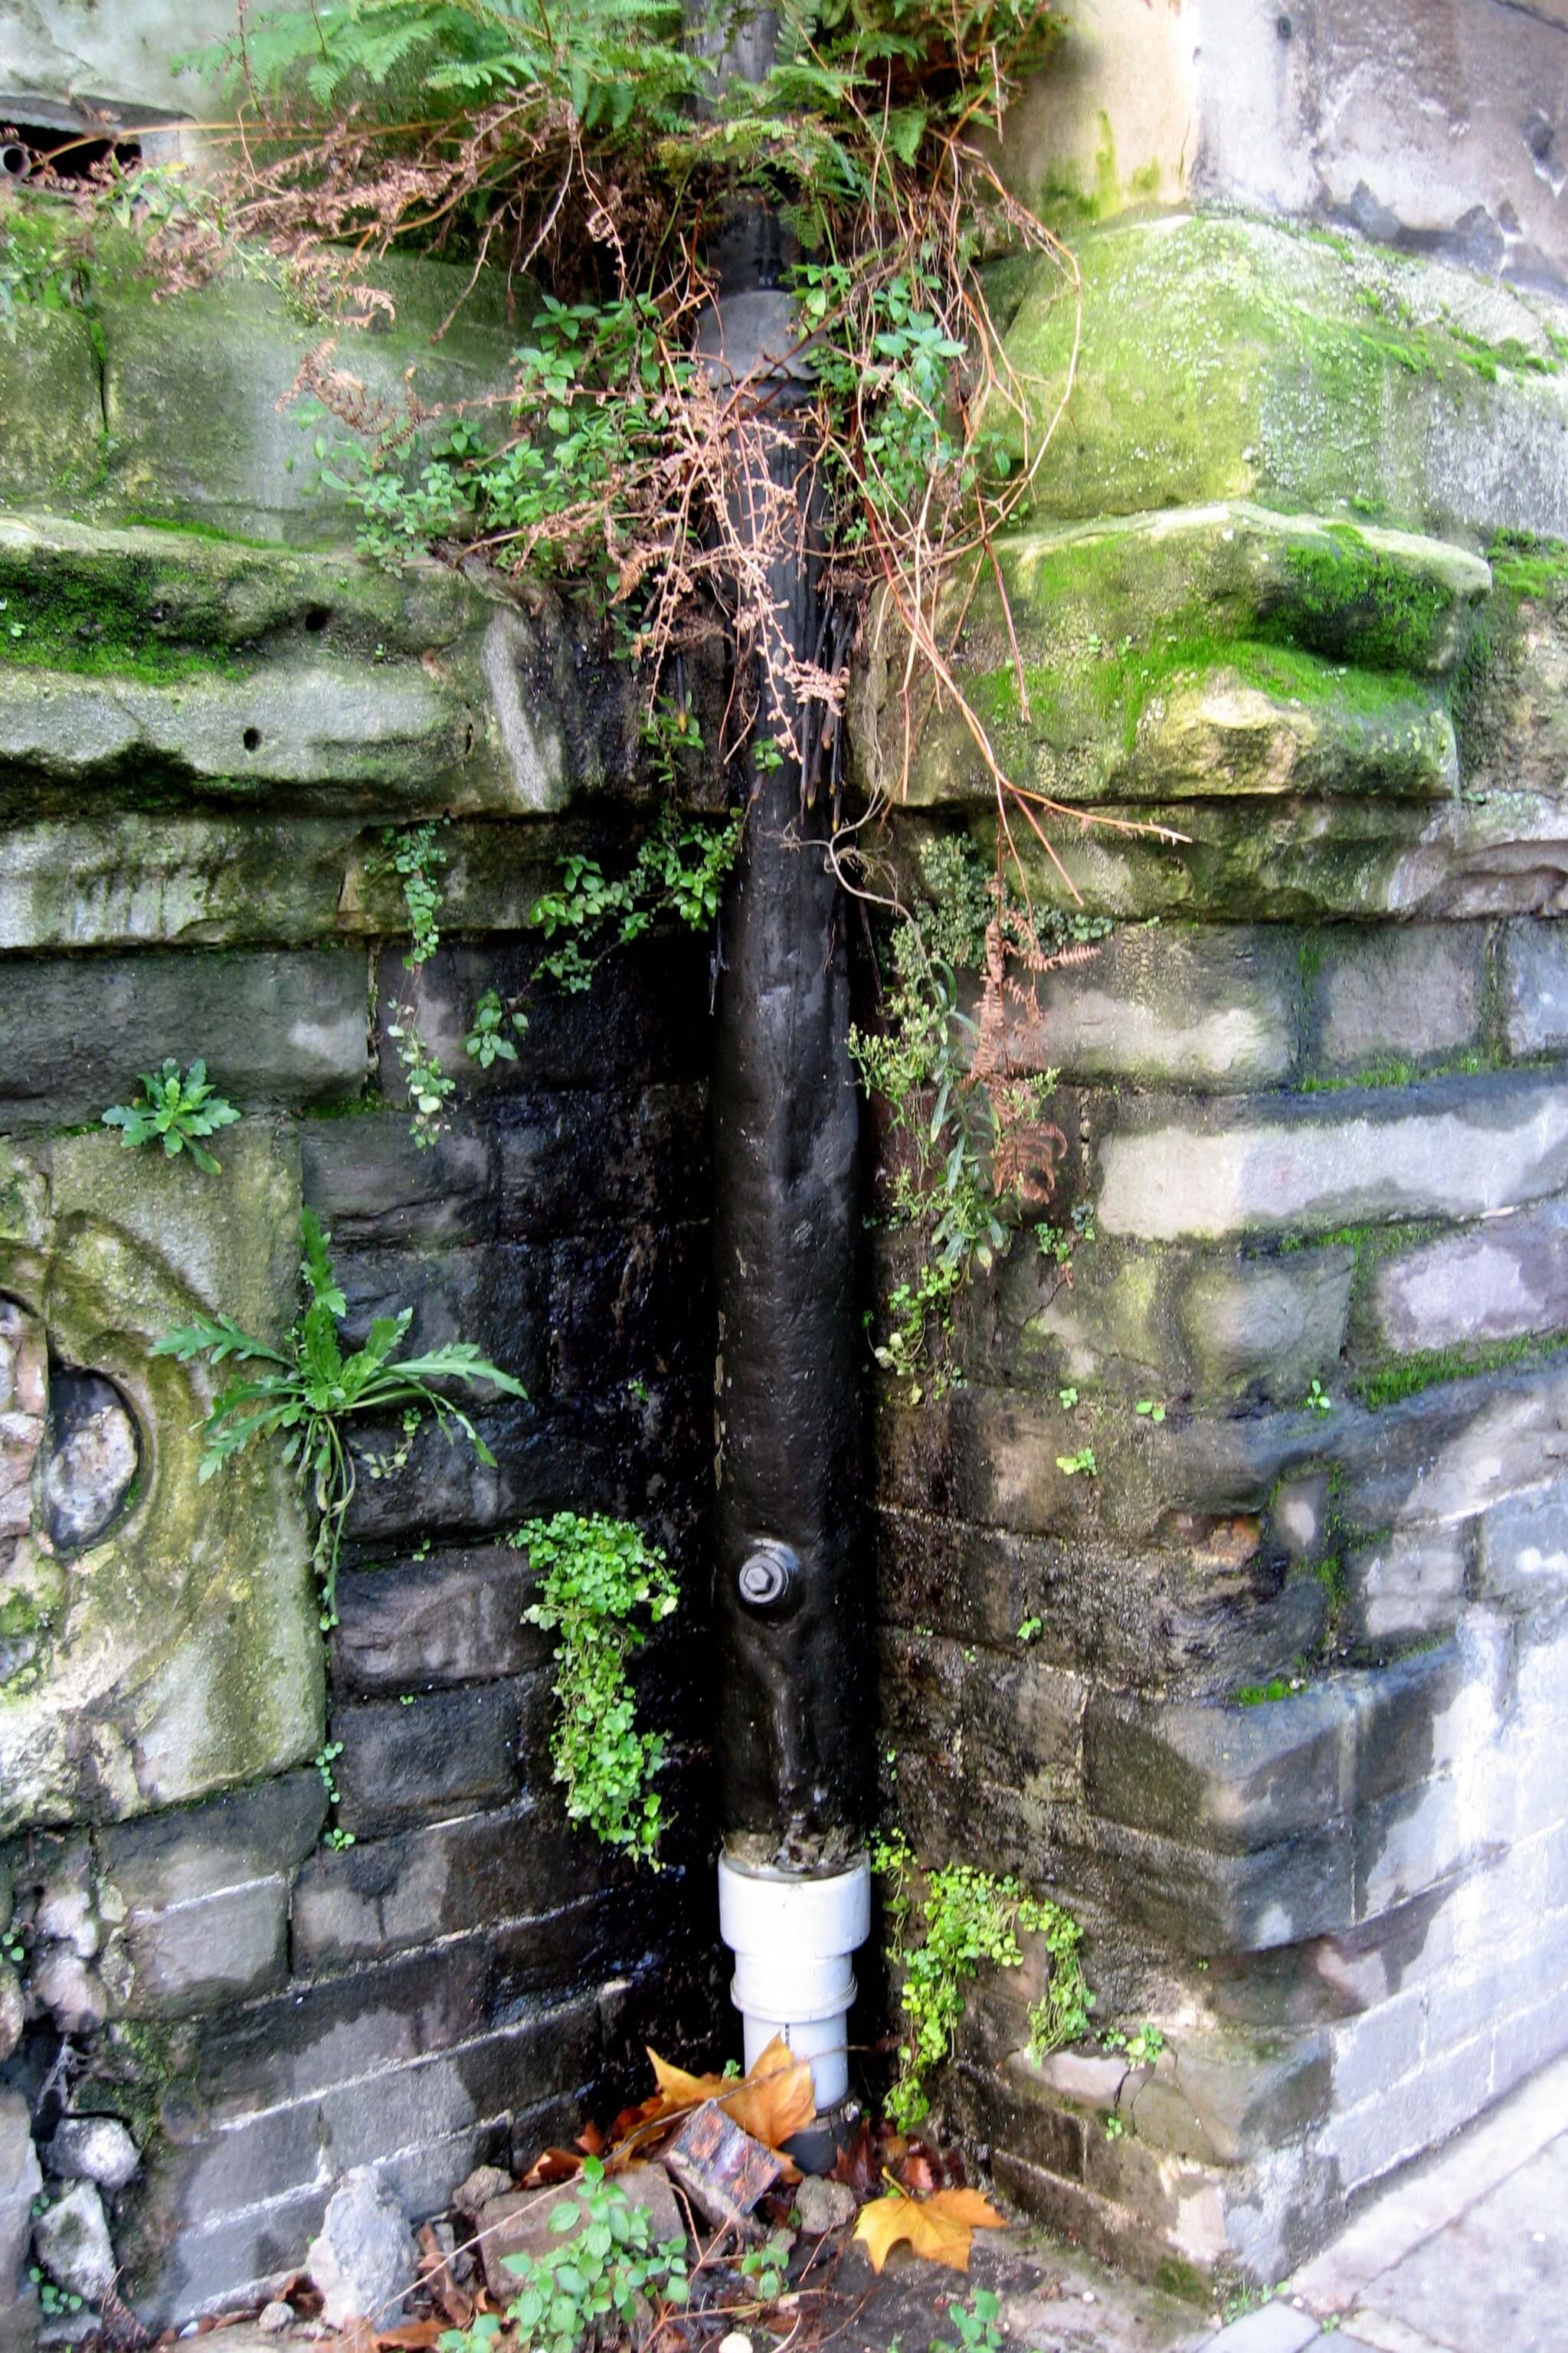 Blocked downpipe causing damp and vegetation to grow